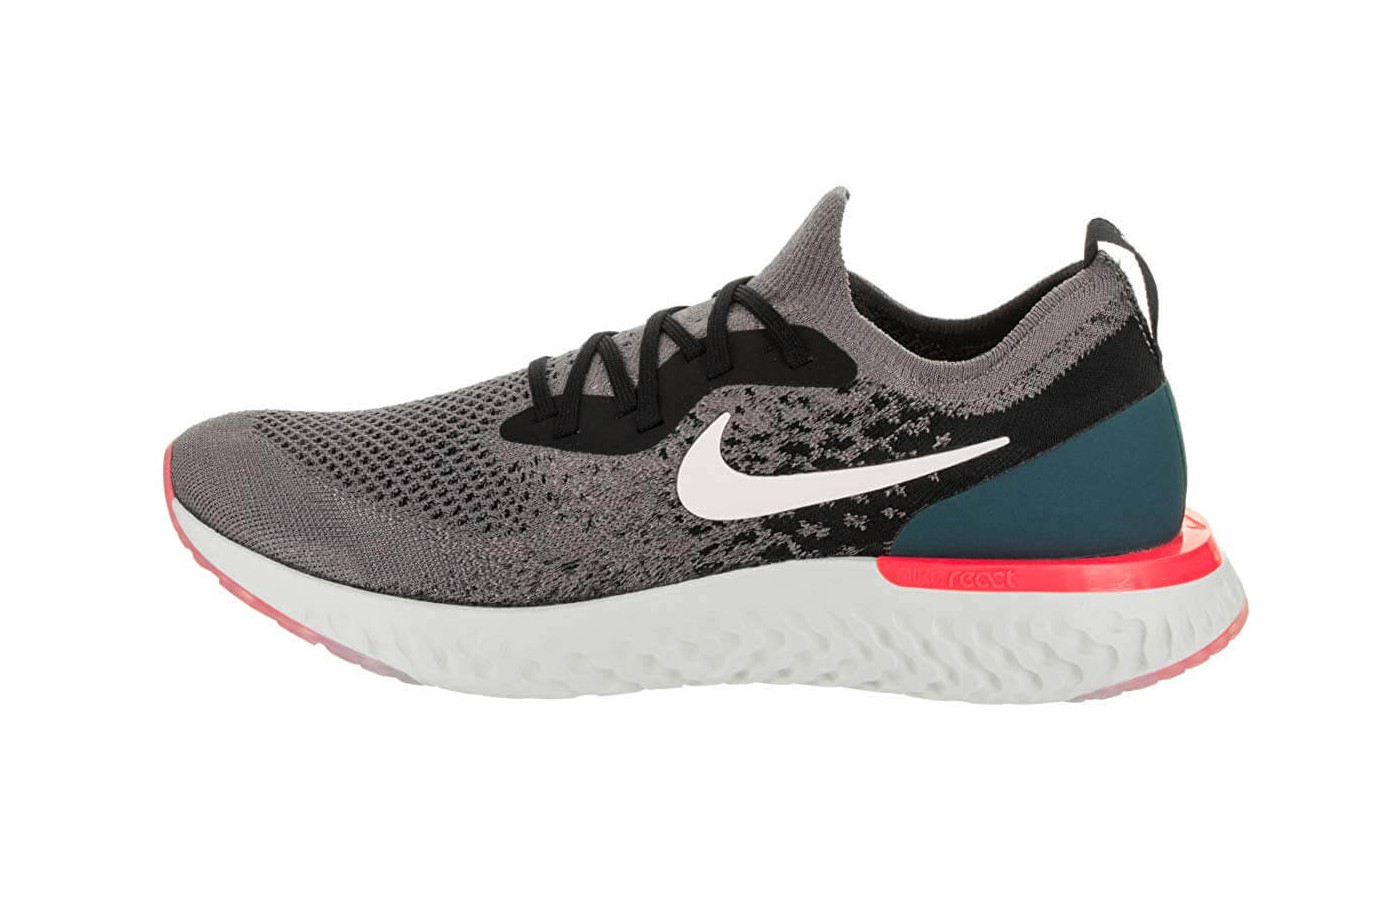 Nike Epic React Flyknit Lateral 2